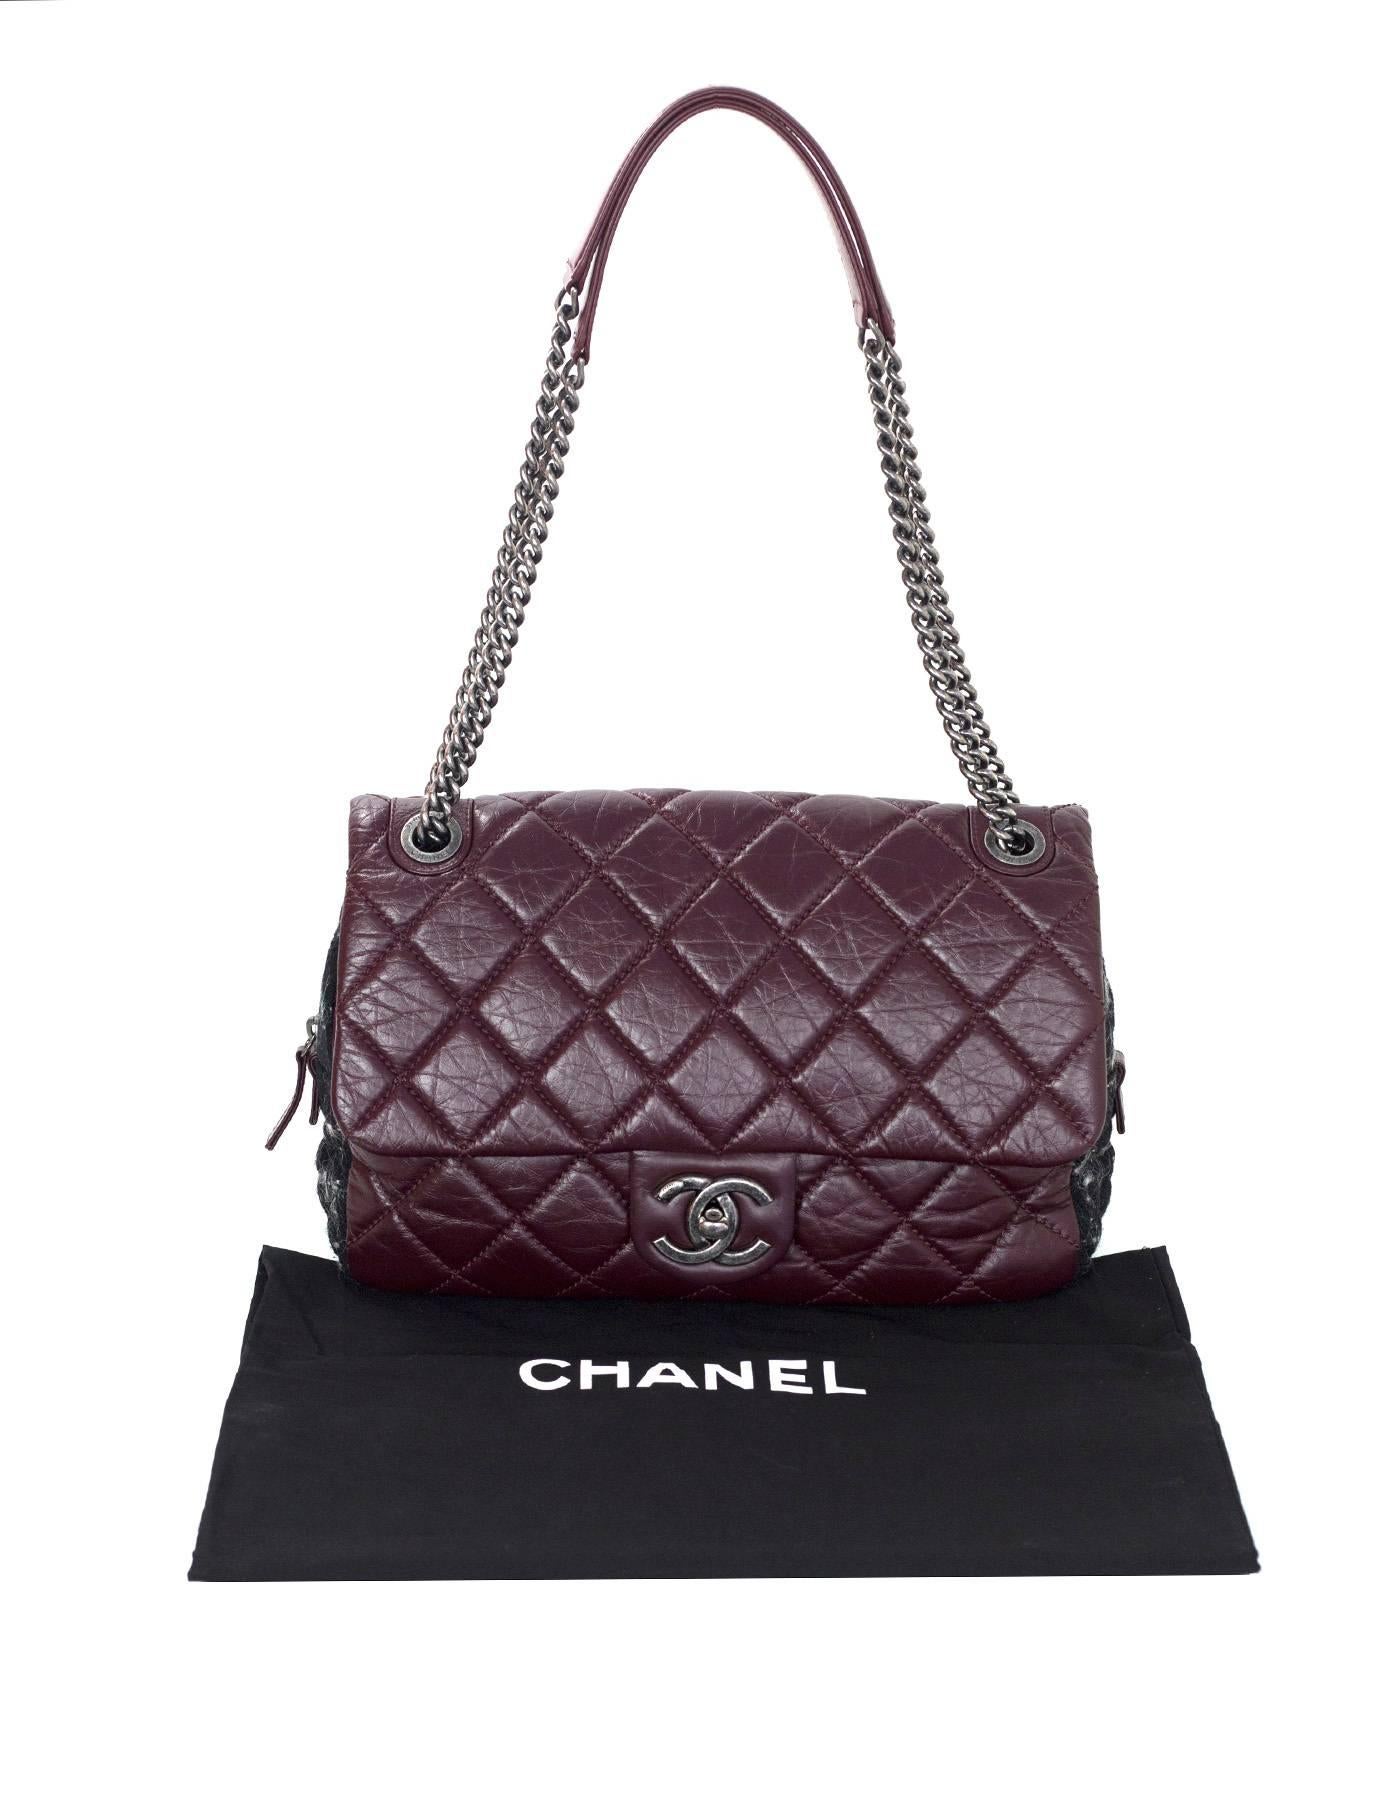 Chanel Burgundy Quilted Distressed Leather Quilted Flap Bag w/ Tweed Trim  3